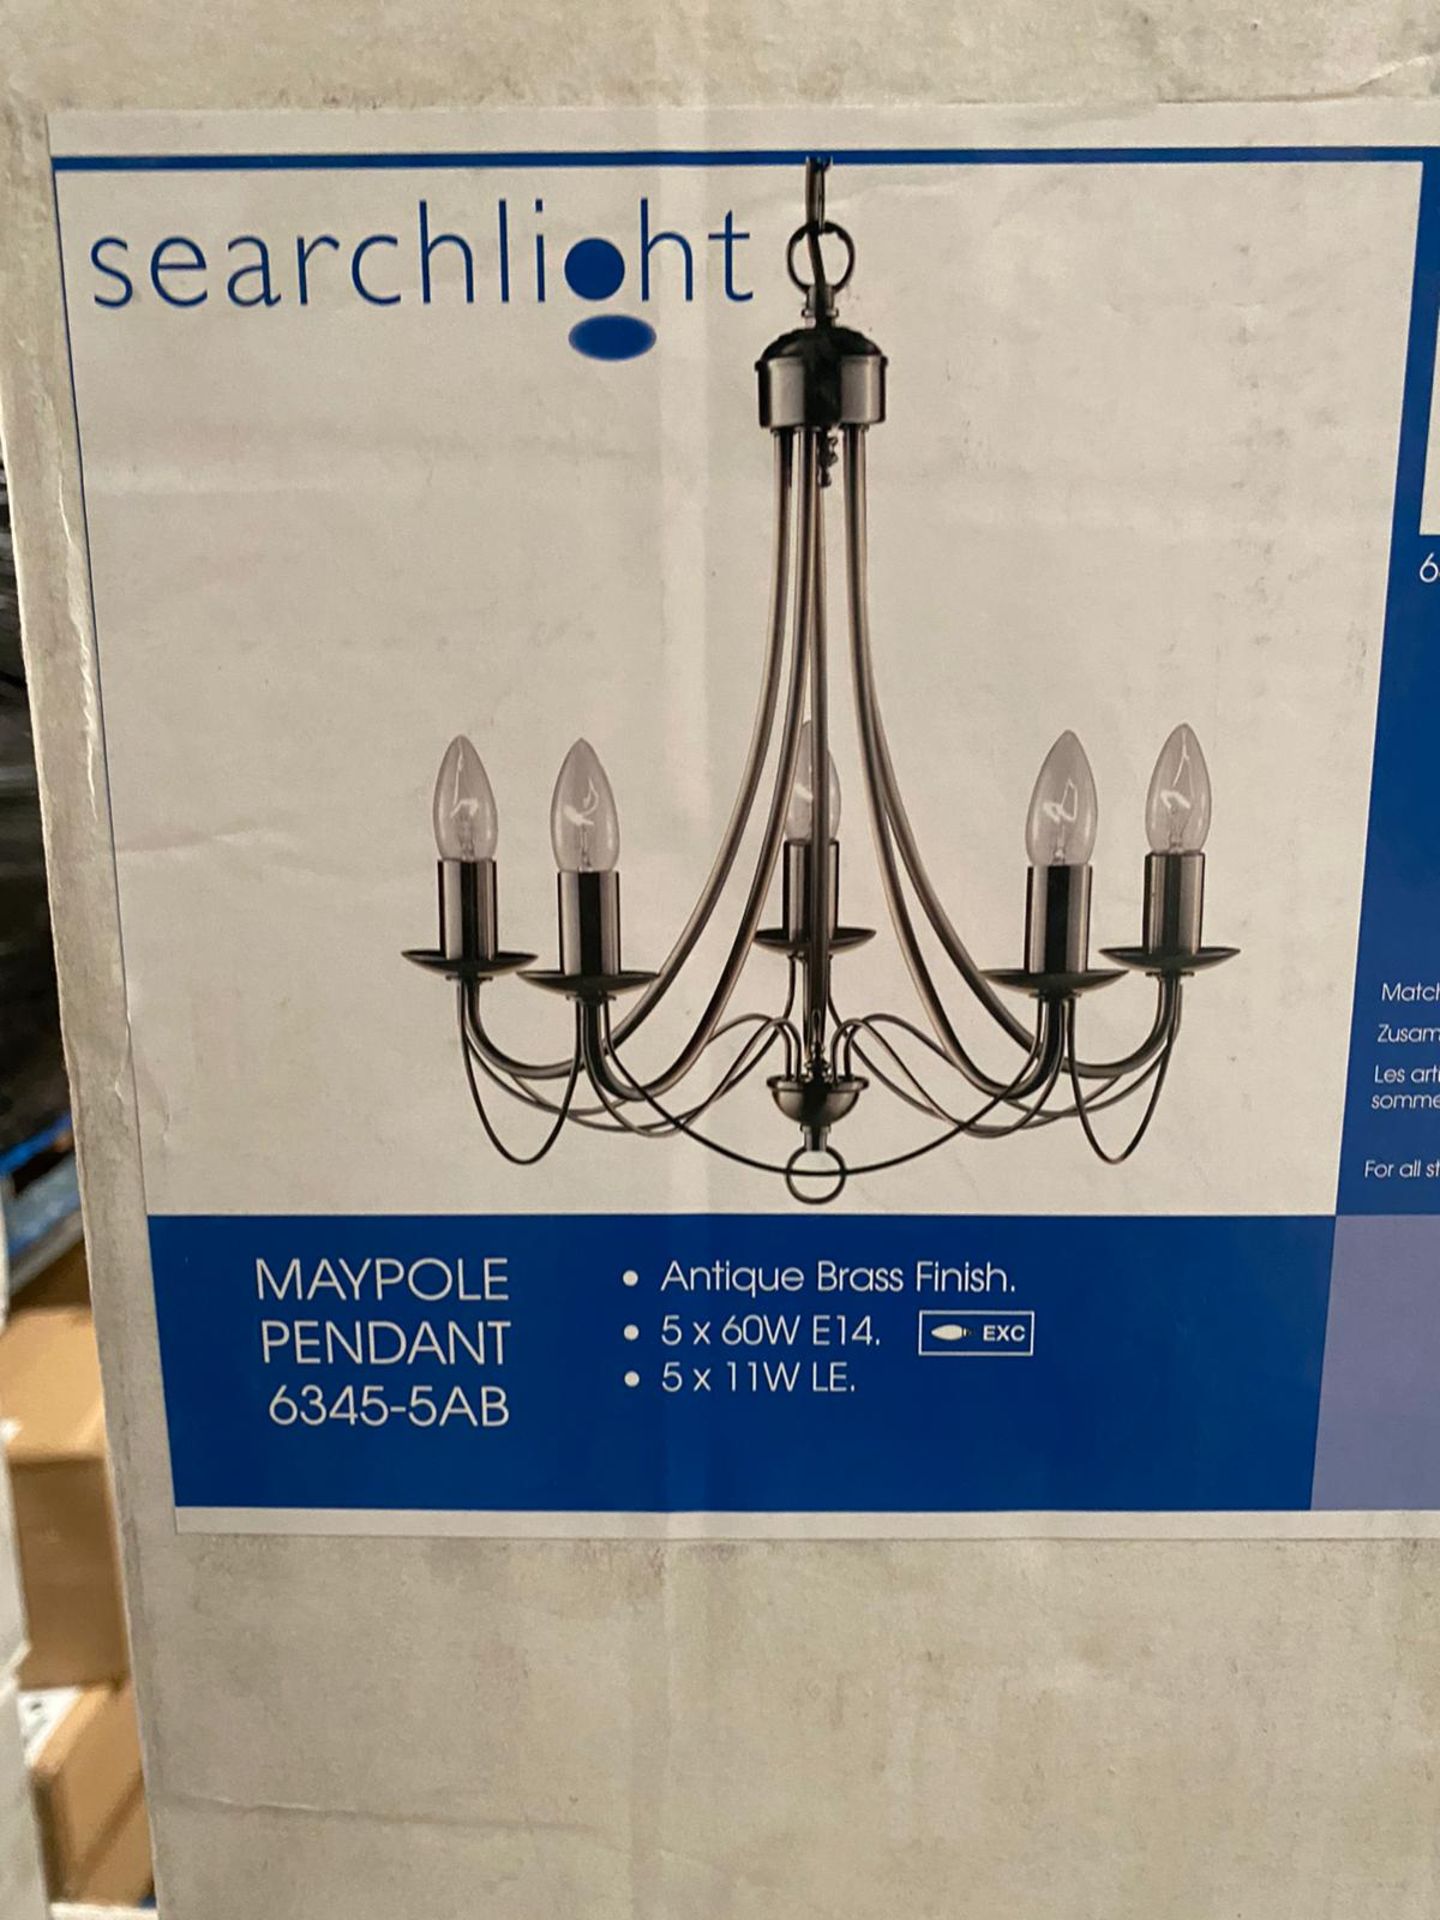 1 x Searchlight Maypole Pendant in Antique Brass- Ref: 6345-5AB - New and Boxed -RRP: £120